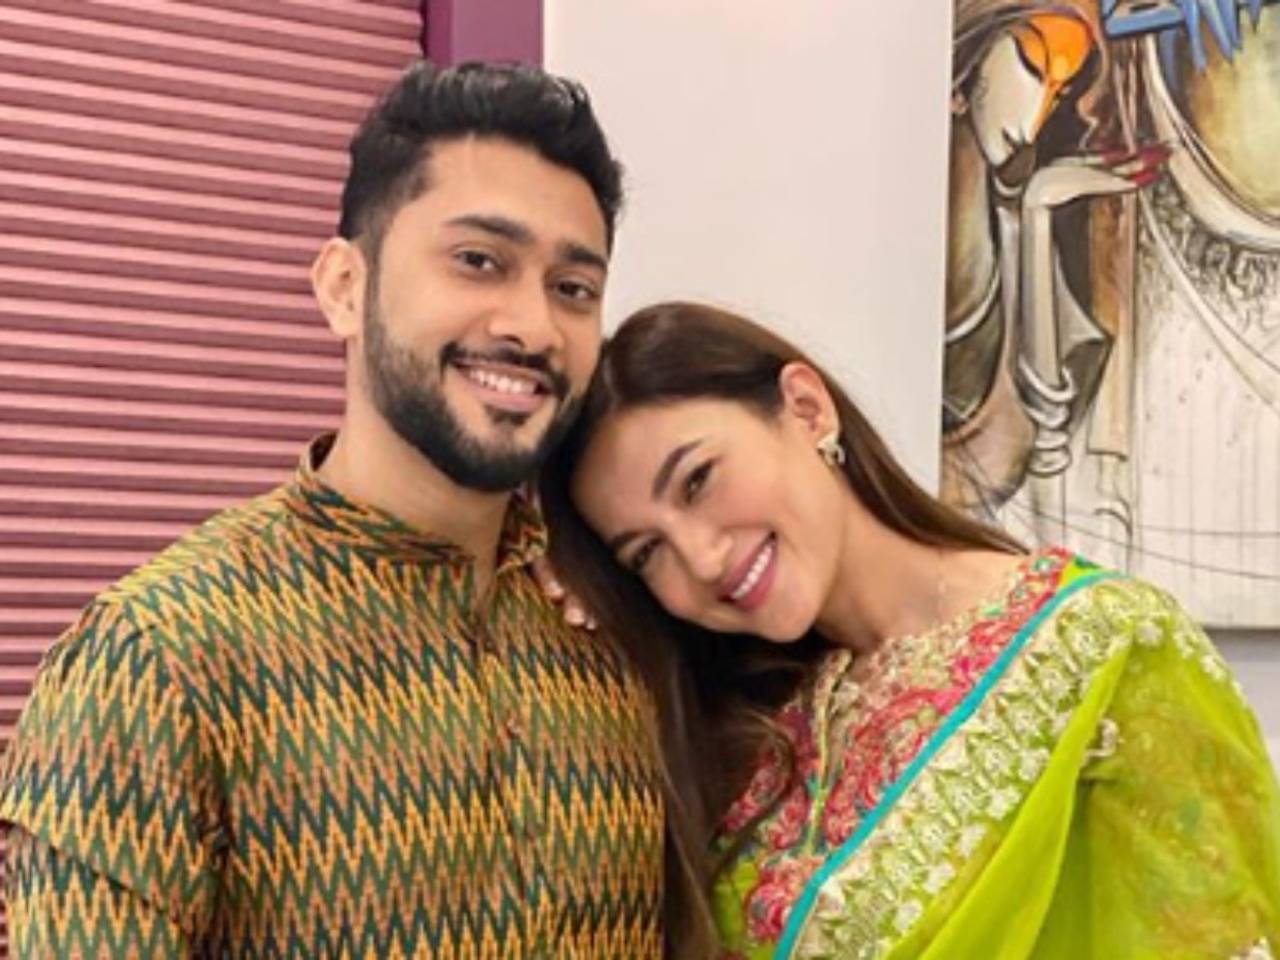 Bigg Boss 7 winner Gauahar Khan and fiance Zaid Darbars wish everyone on Diwali; latters father Ismail Darbar blesses the couple picture